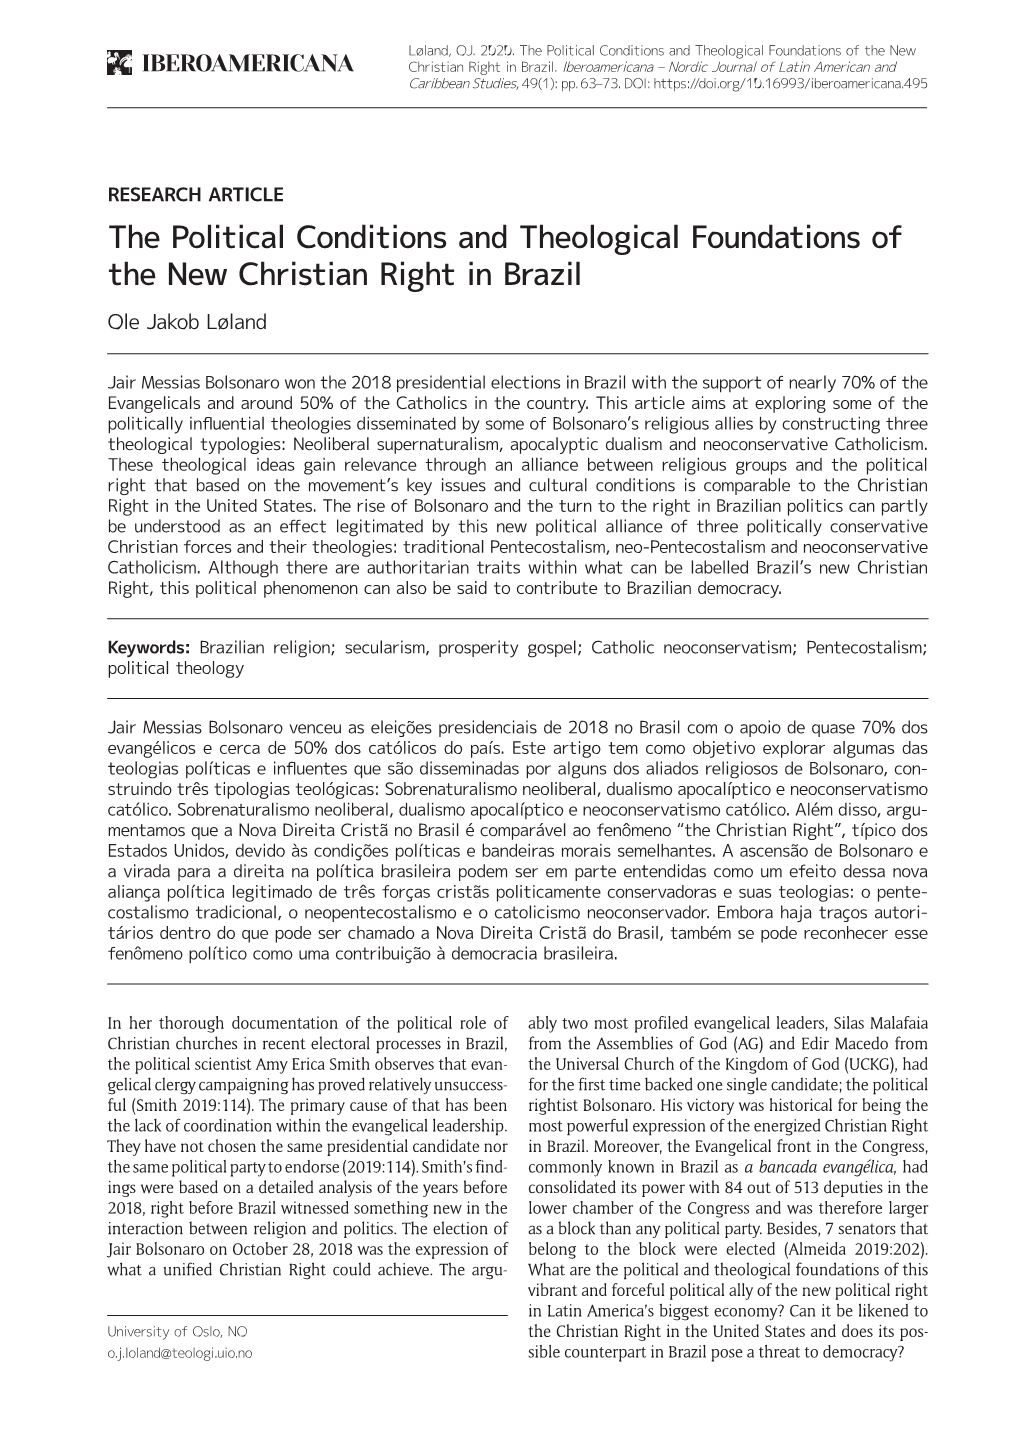 The Political Conditions and Theological Foundations of the New Christian Right in Brazil